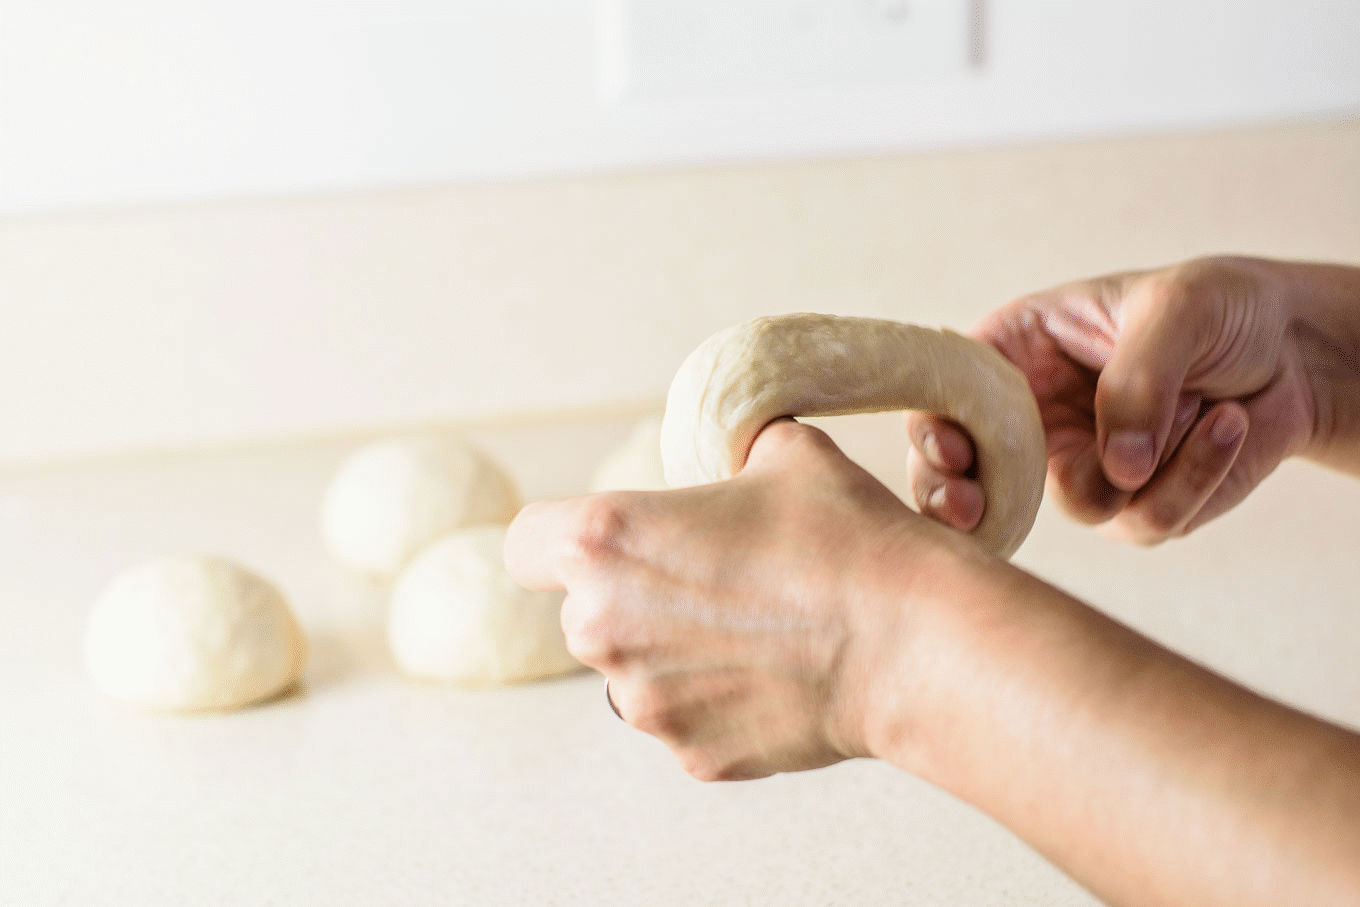 shaping bagels with hole and stretching method